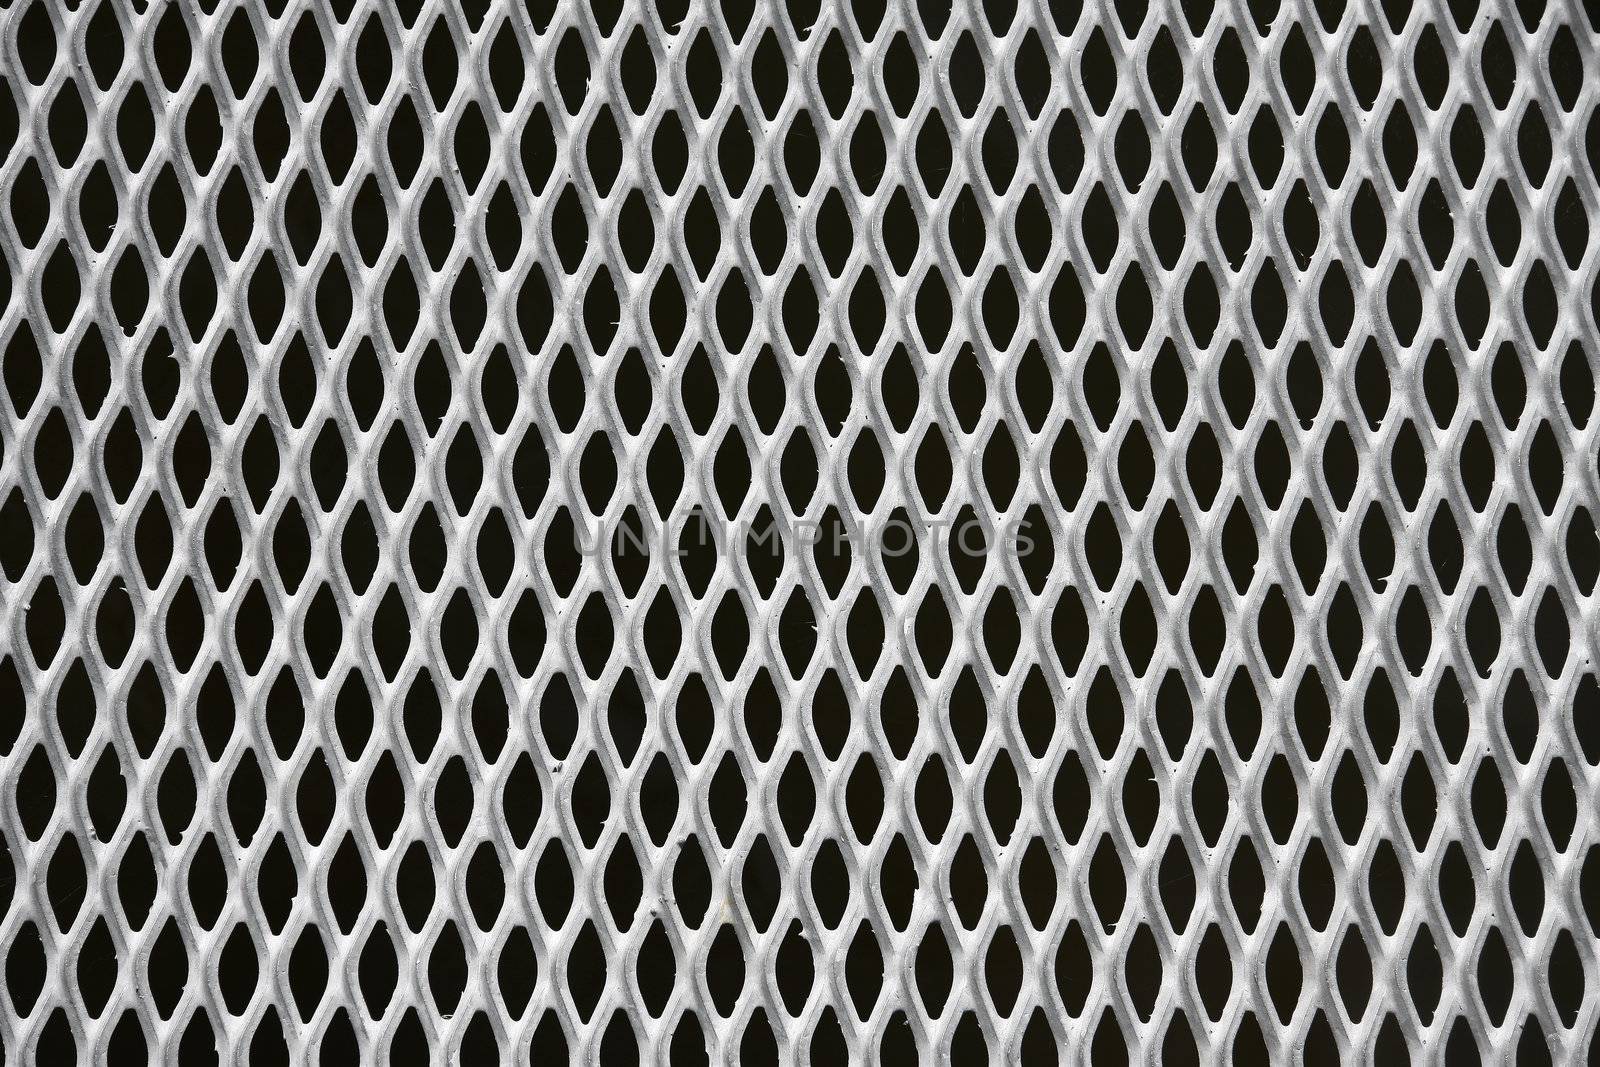 Close up of a patterned grid